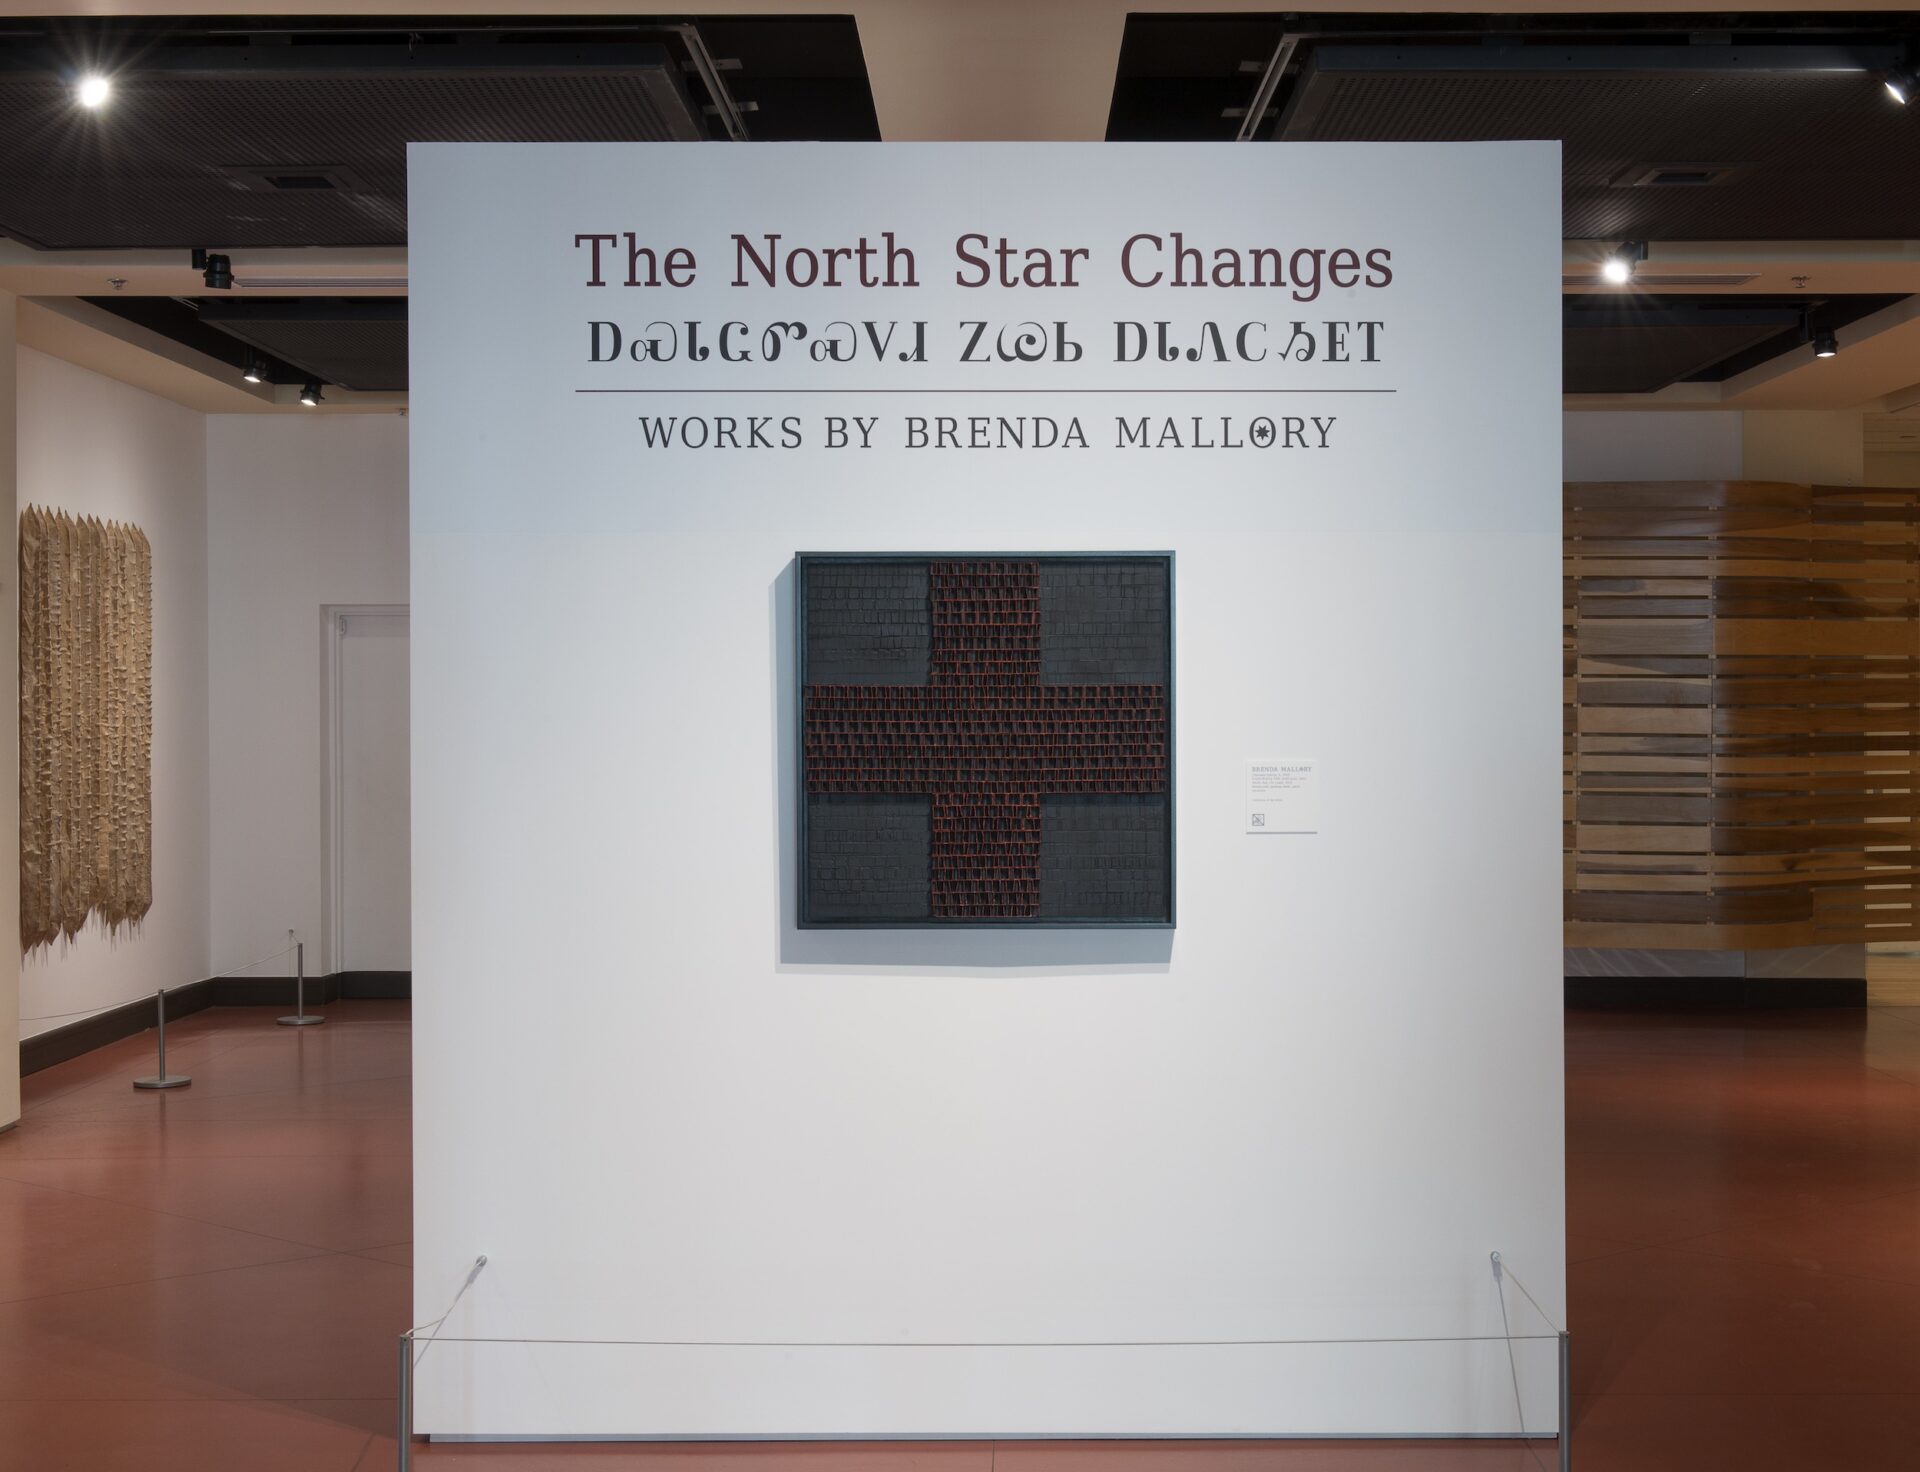 The North Star Changes Works by Brenda Mallory text on a gallery wall.